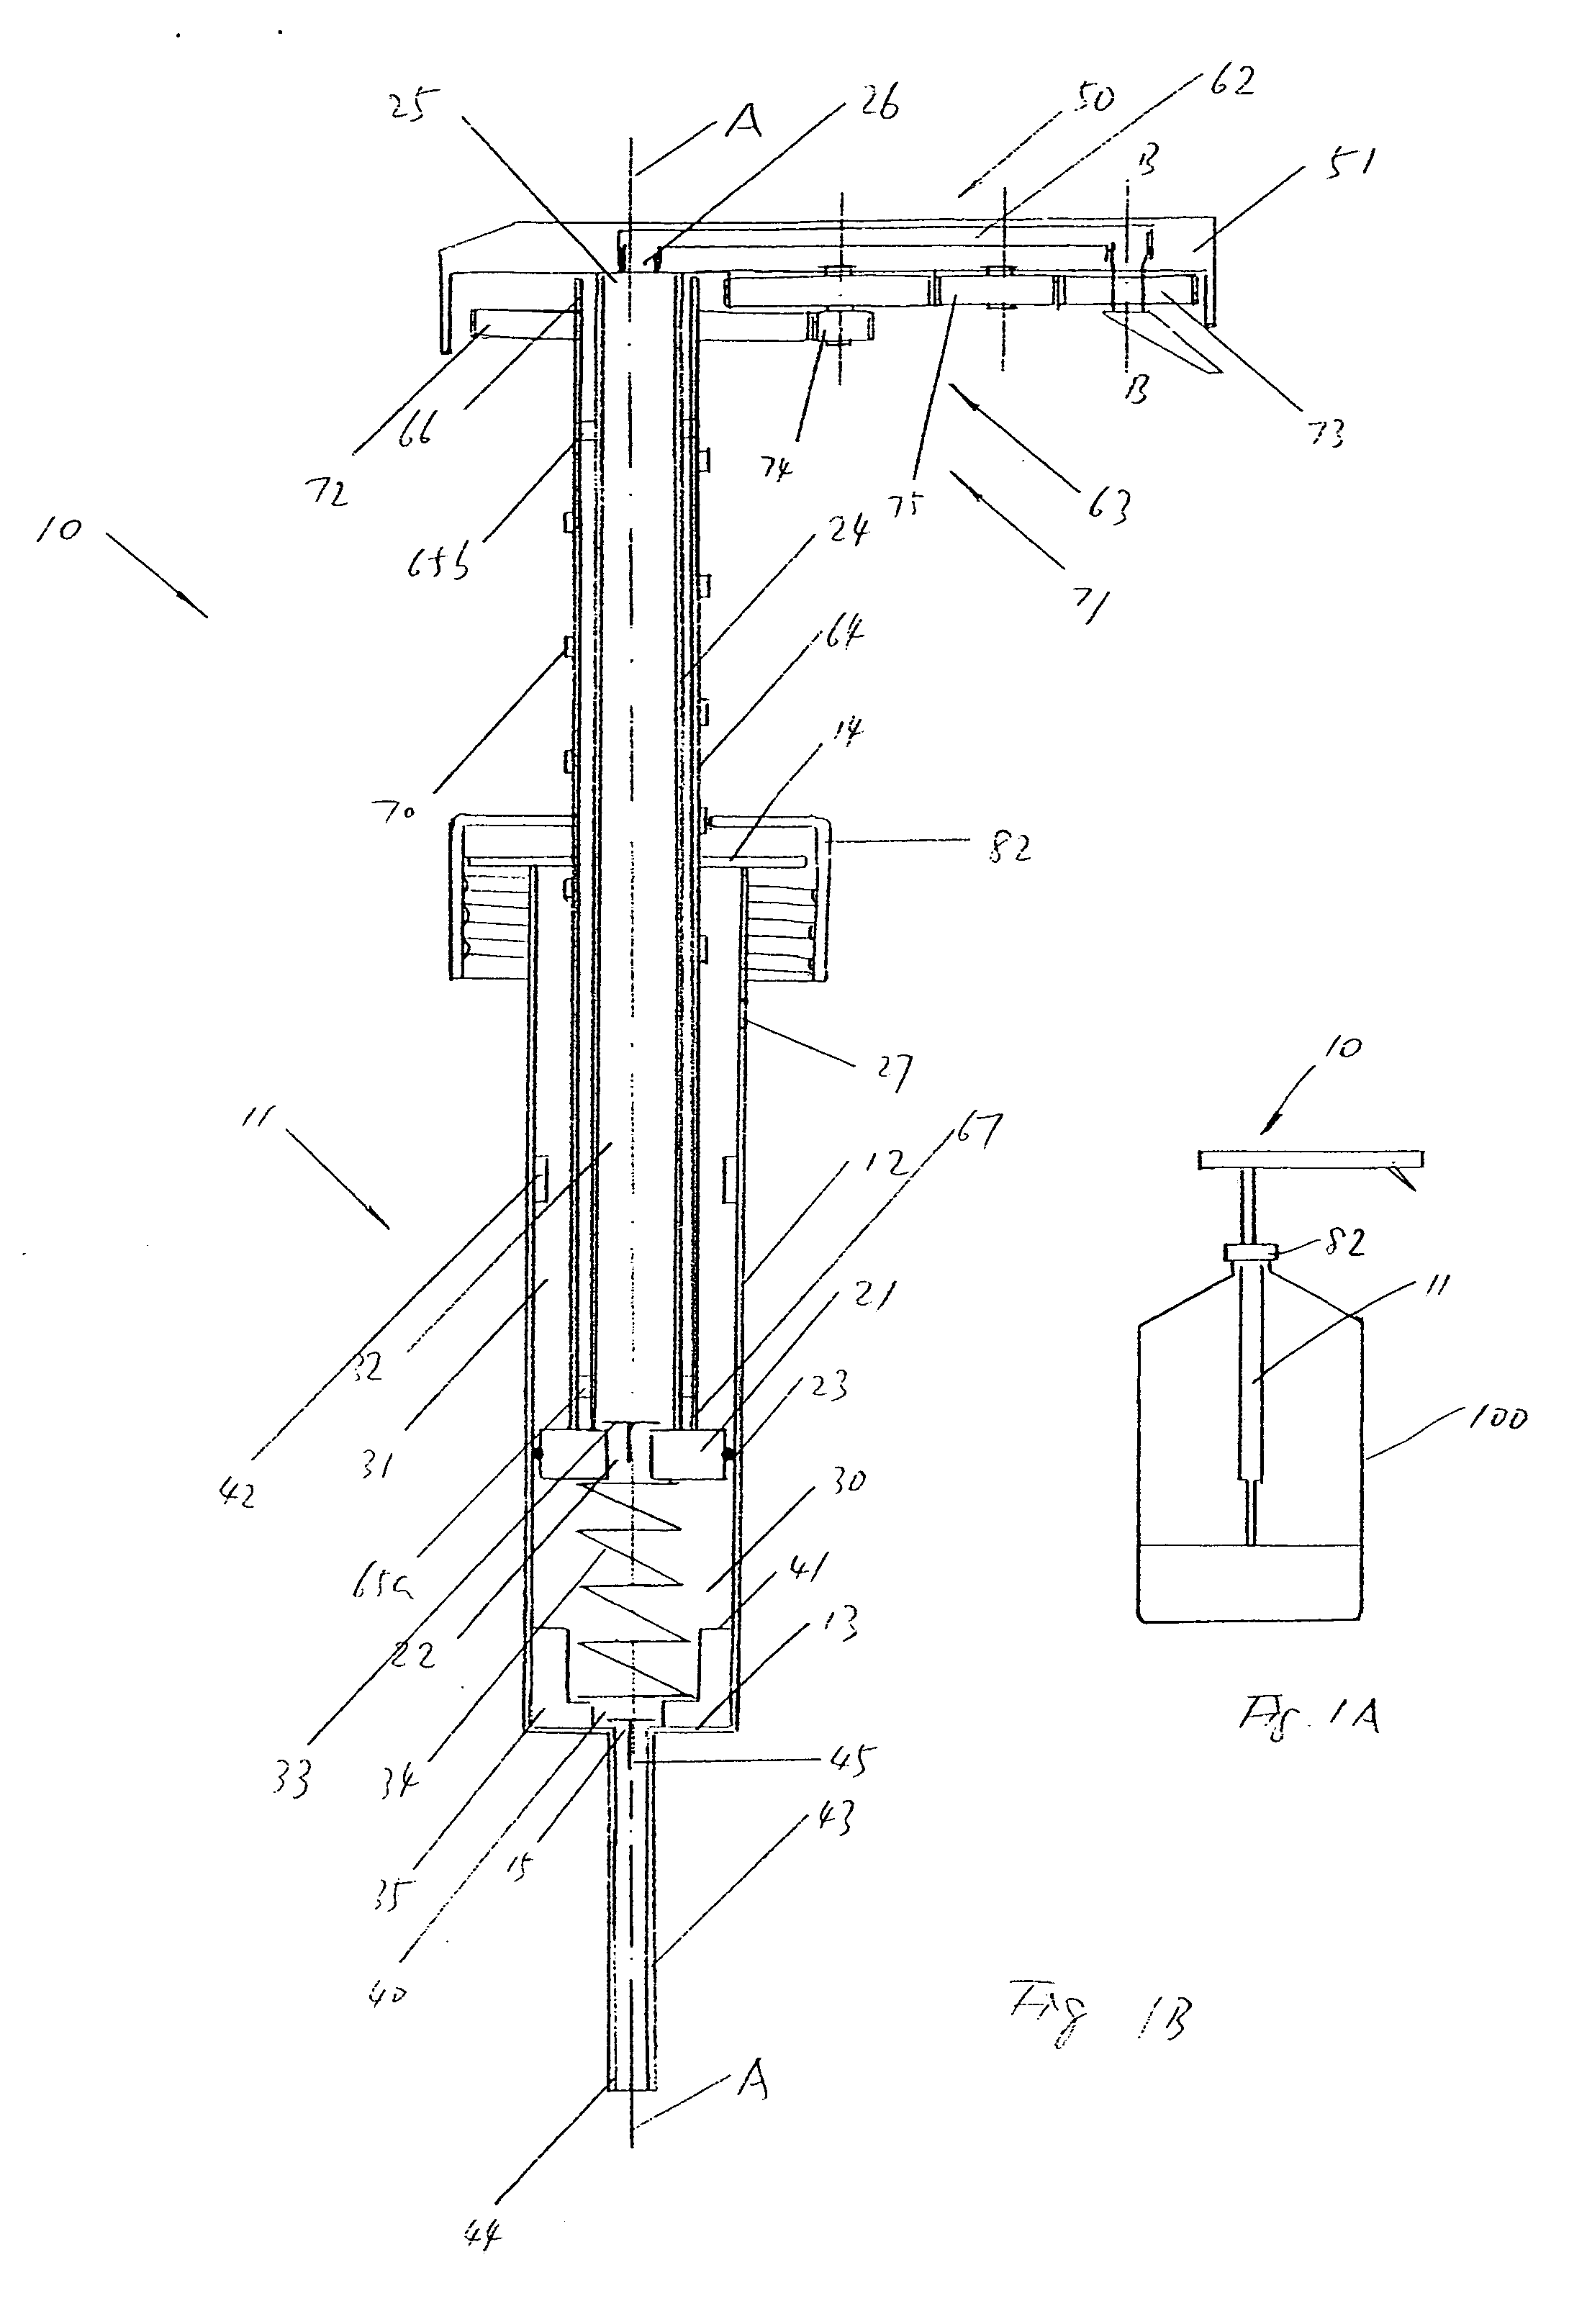 Device for dispensing a viscous fluid product in a pattern